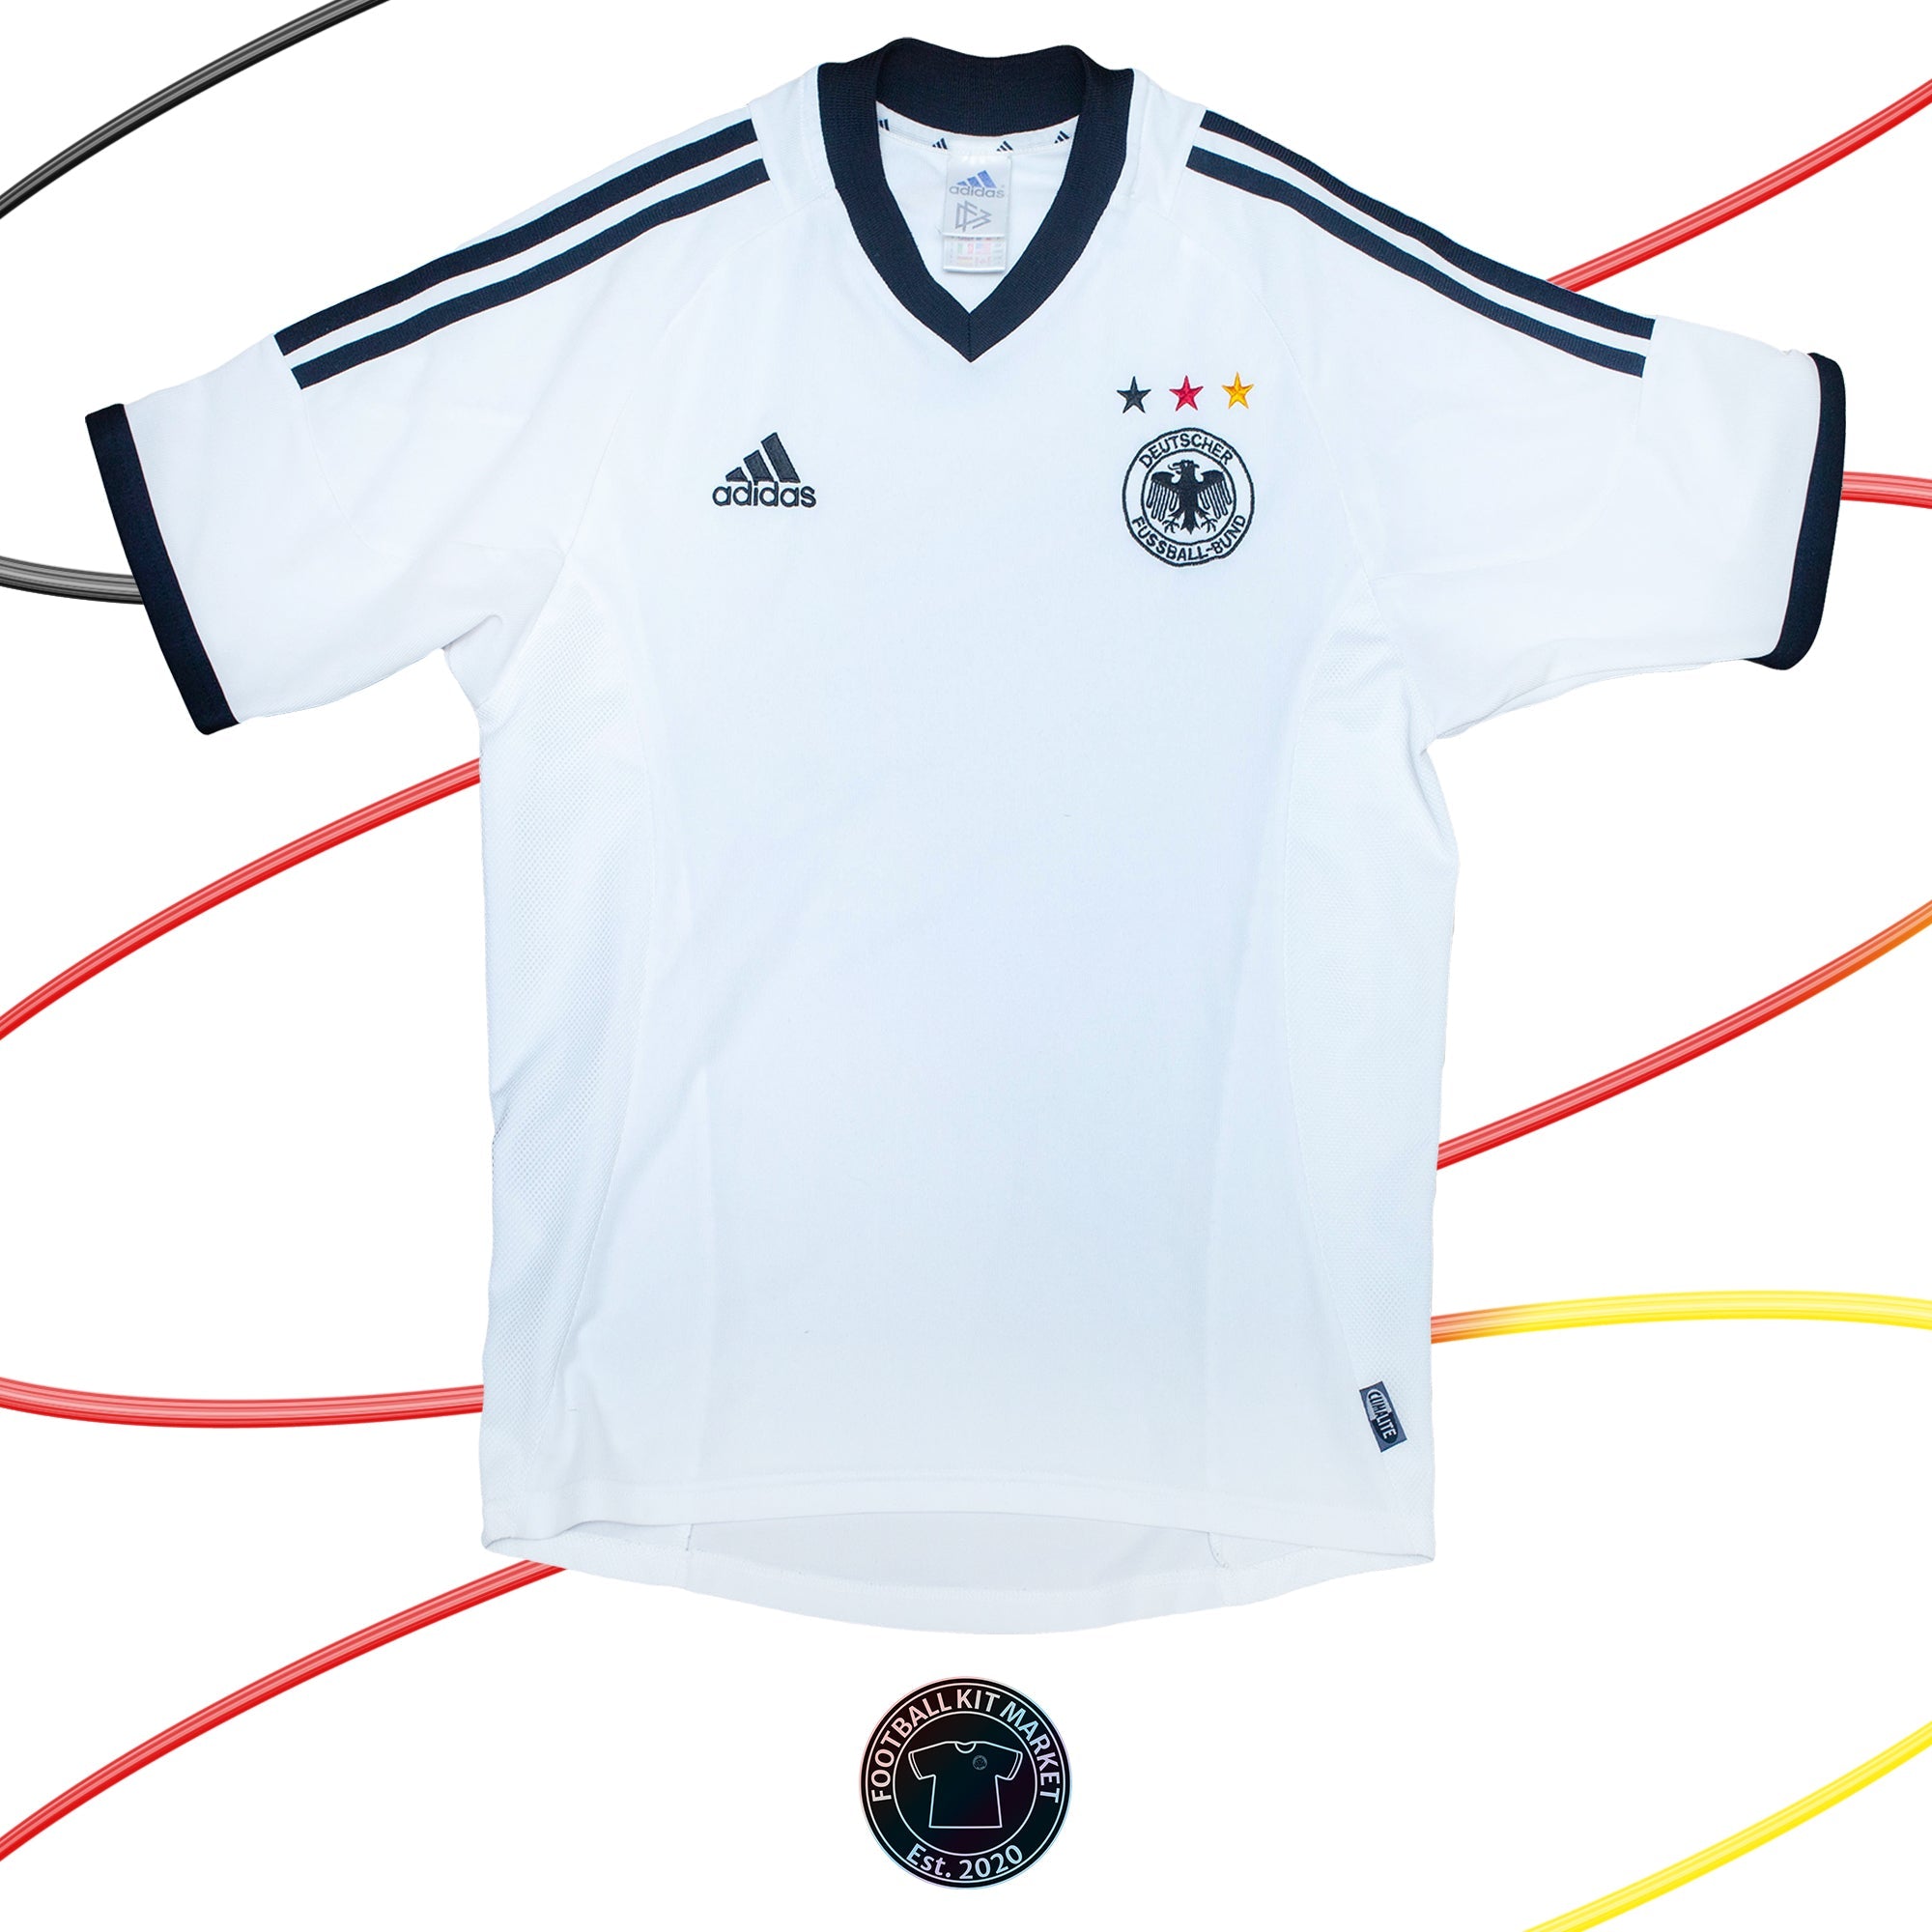 Genuine GERMANY Home Shirt (2002-2004) - ADIDAS (S) - Product Image from Football Kit Market